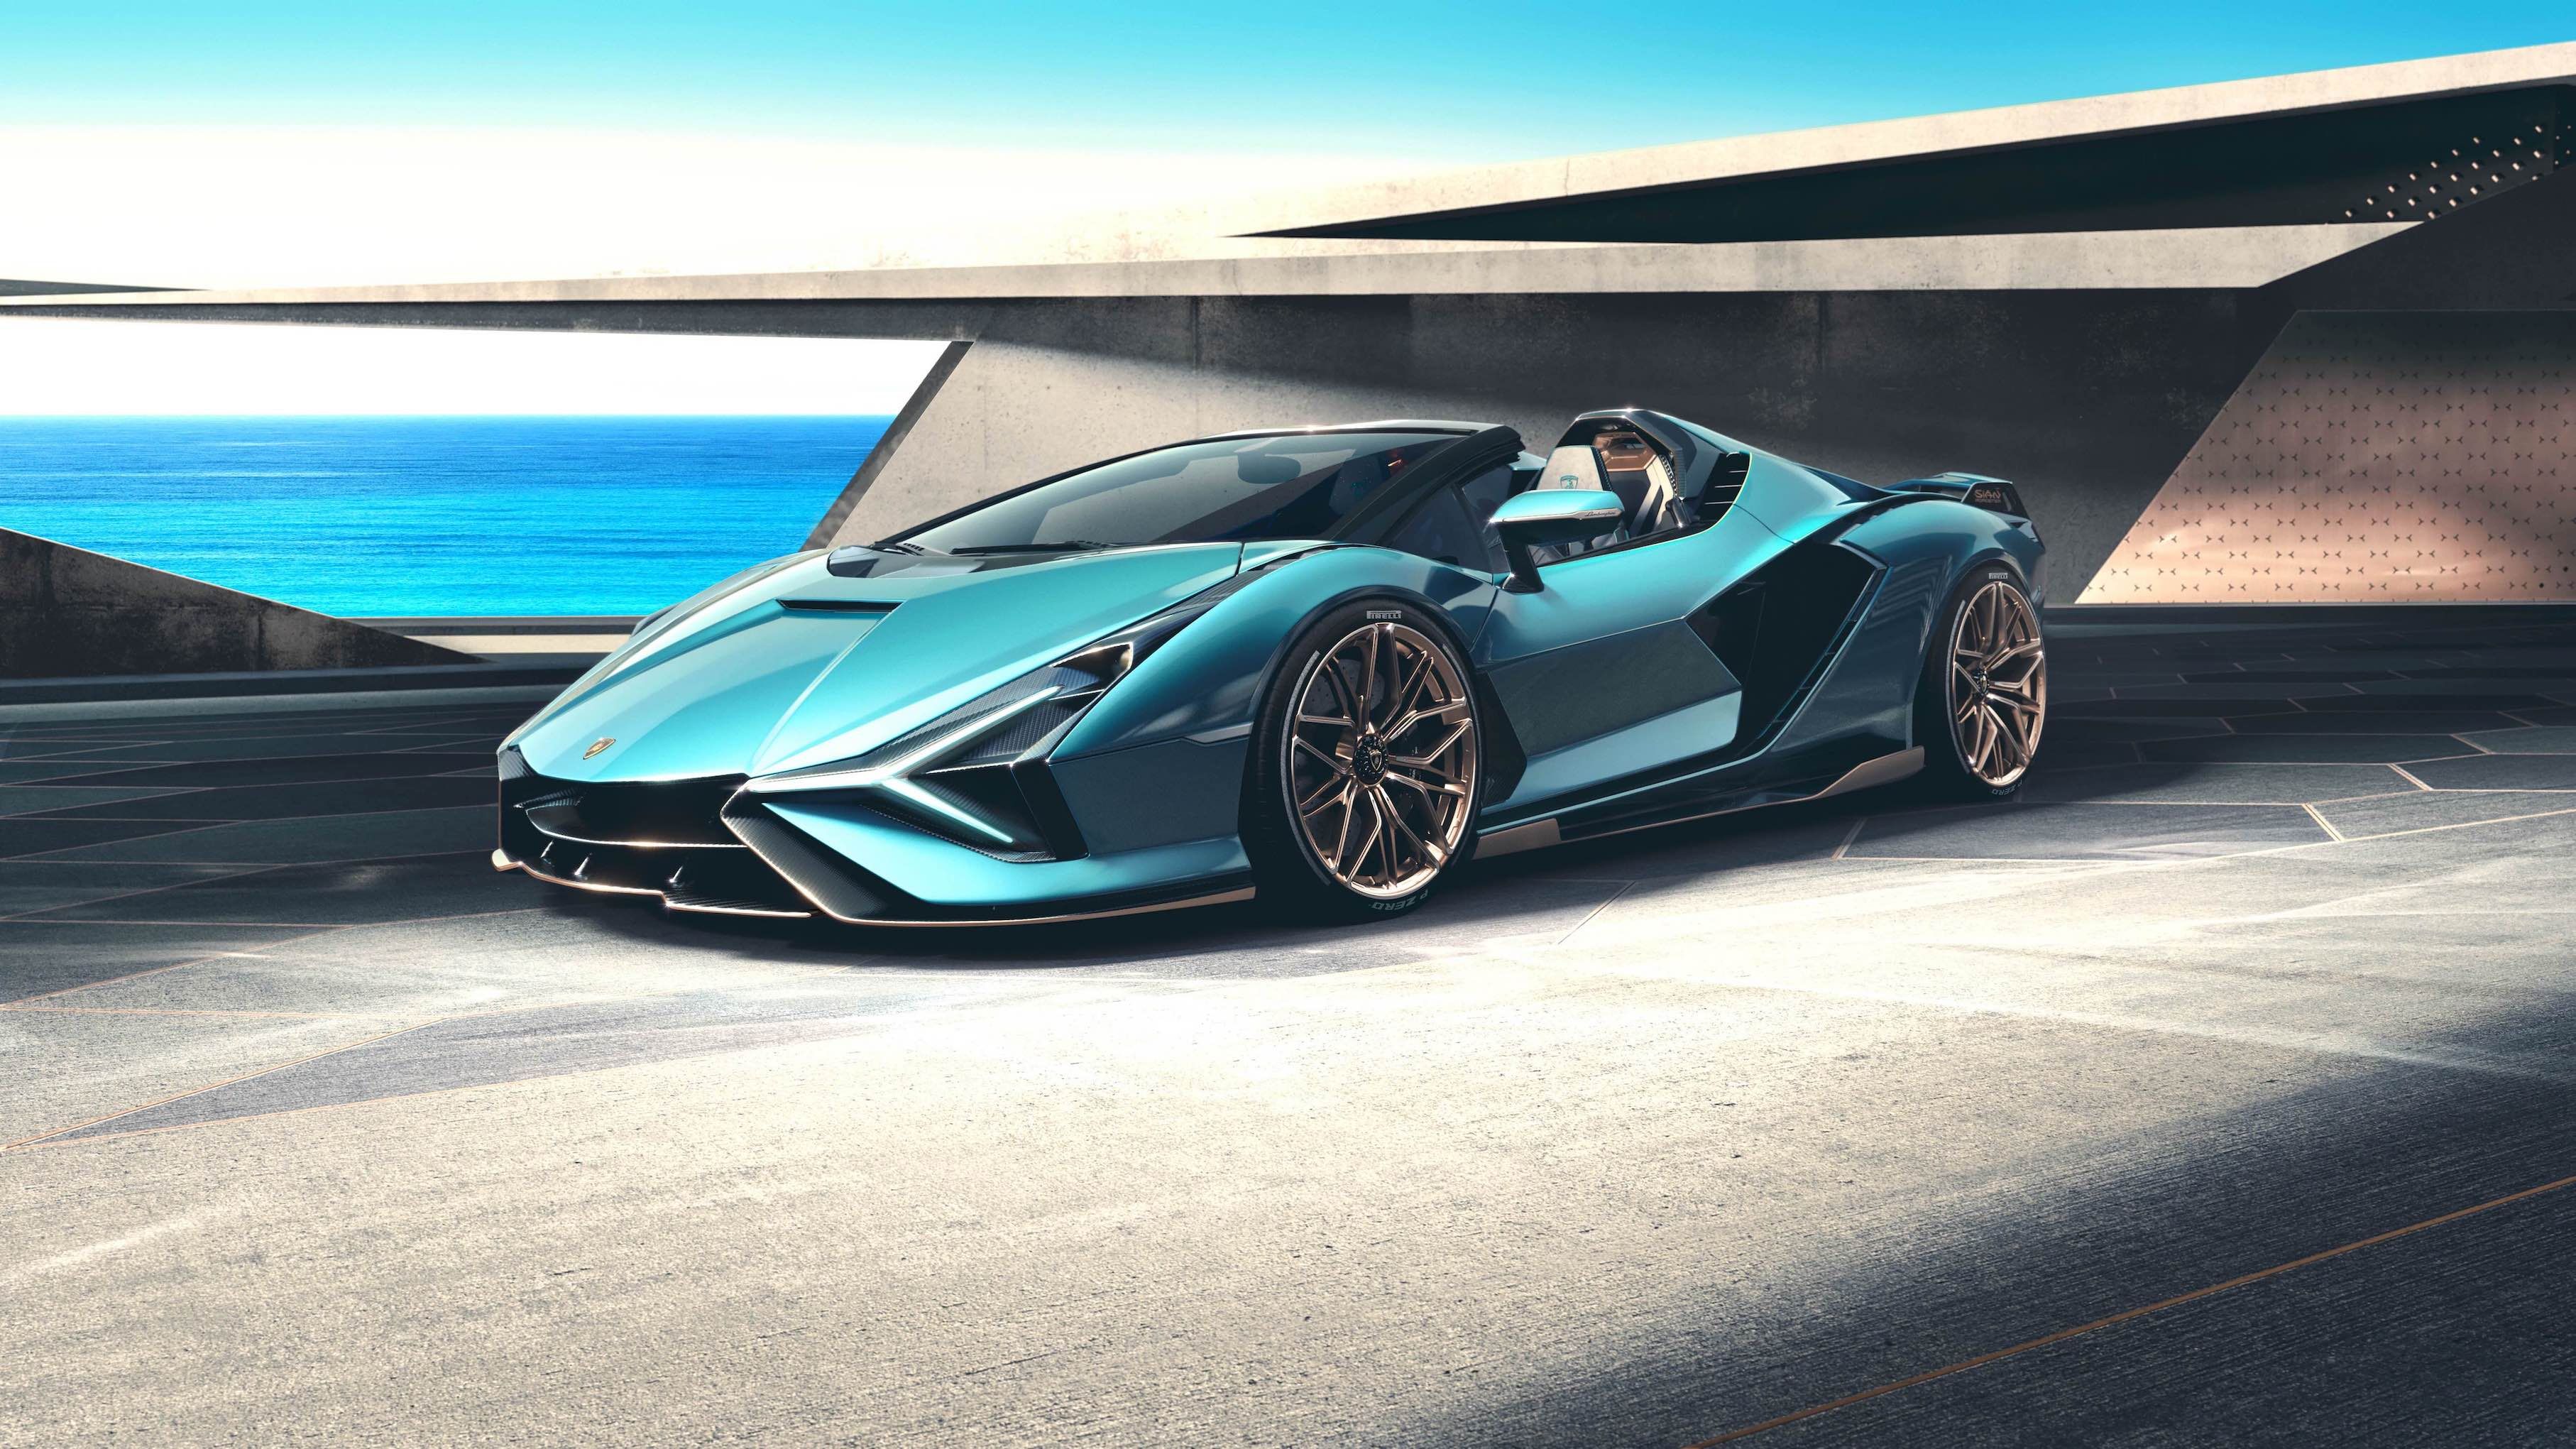 807-HP Lamborghini Sián Roadster Revealed, but It's Already Sold Out